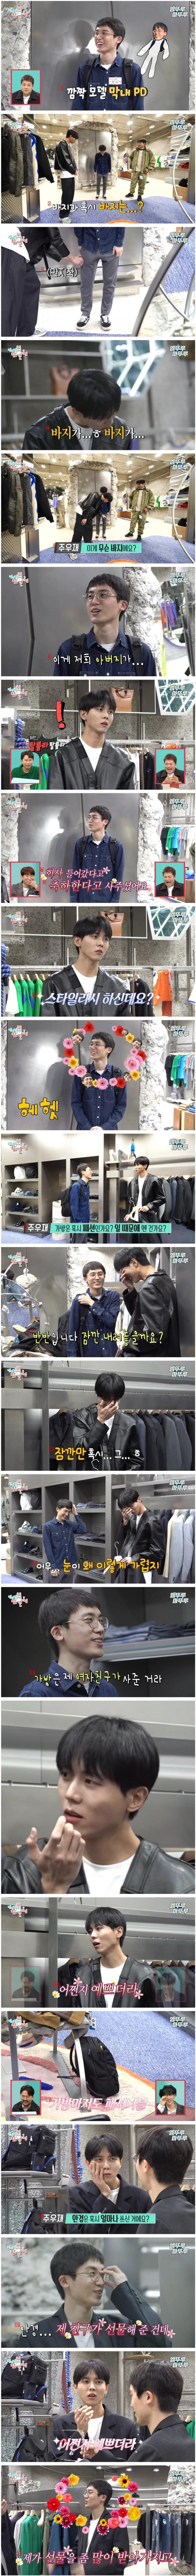 Joo Woojae can't point out anything about PD fashion